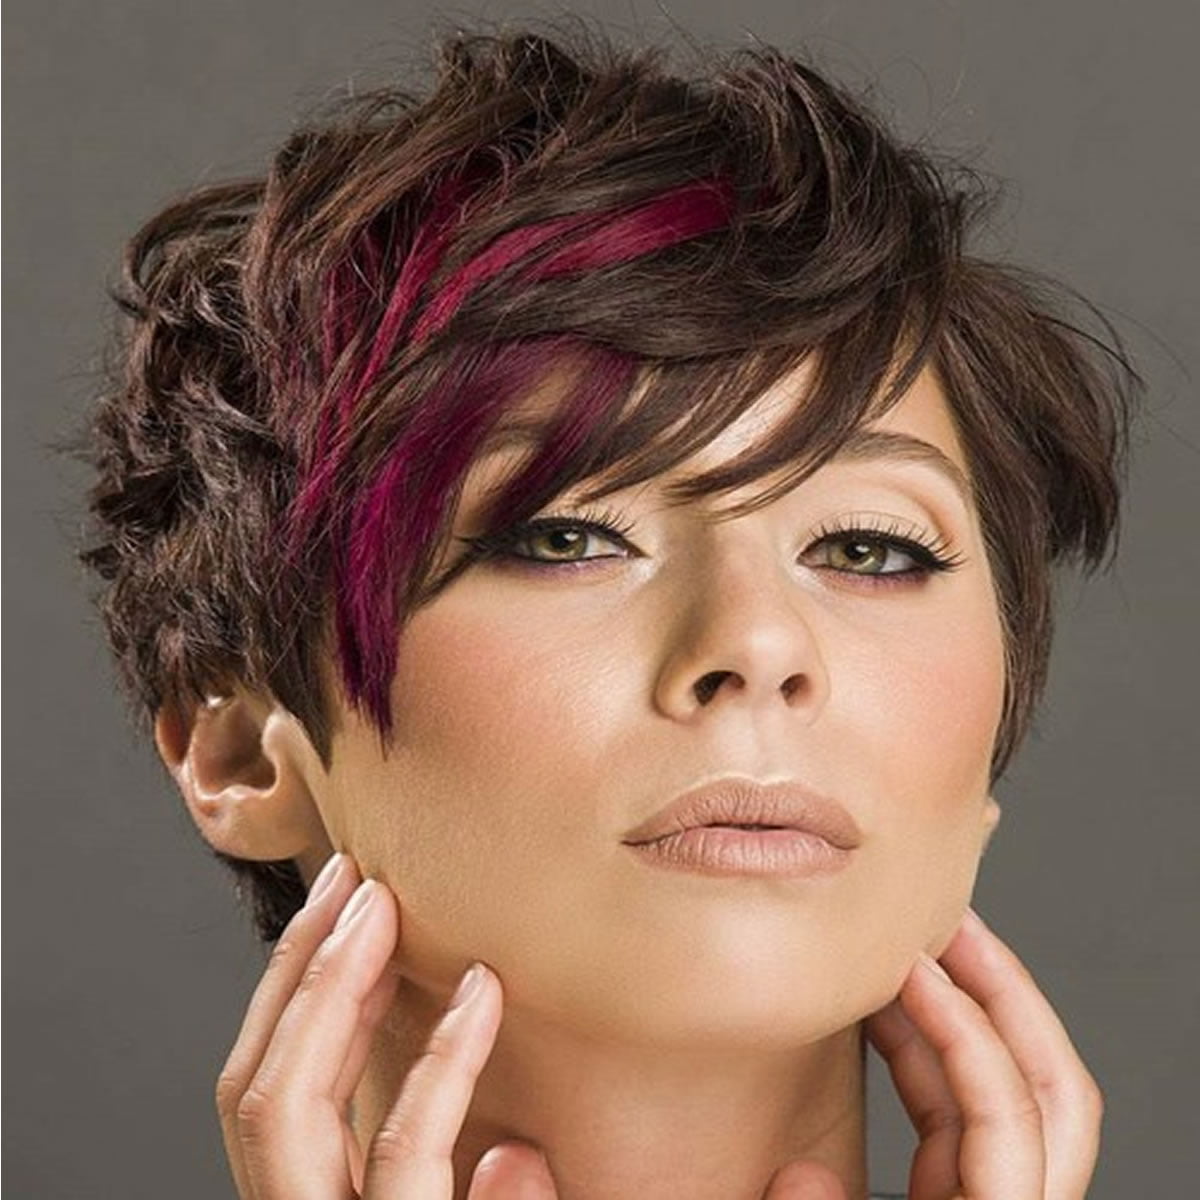 Red balayage pixie haircut for short hair.